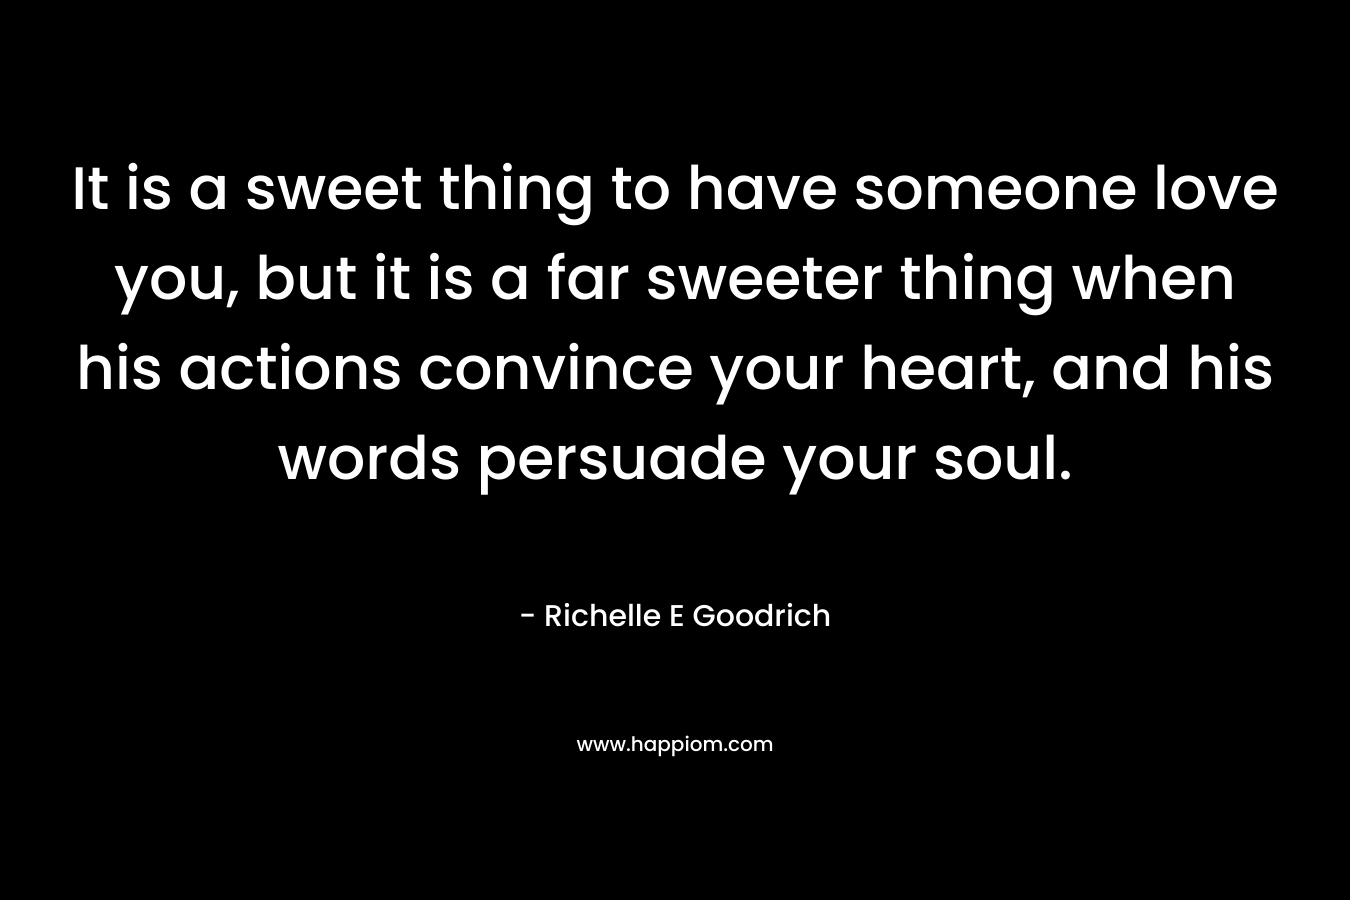 It is a sweet thing to have someone love you, but it is a far sweeter thing when his actions convince your heart, and his words persuade your soul.